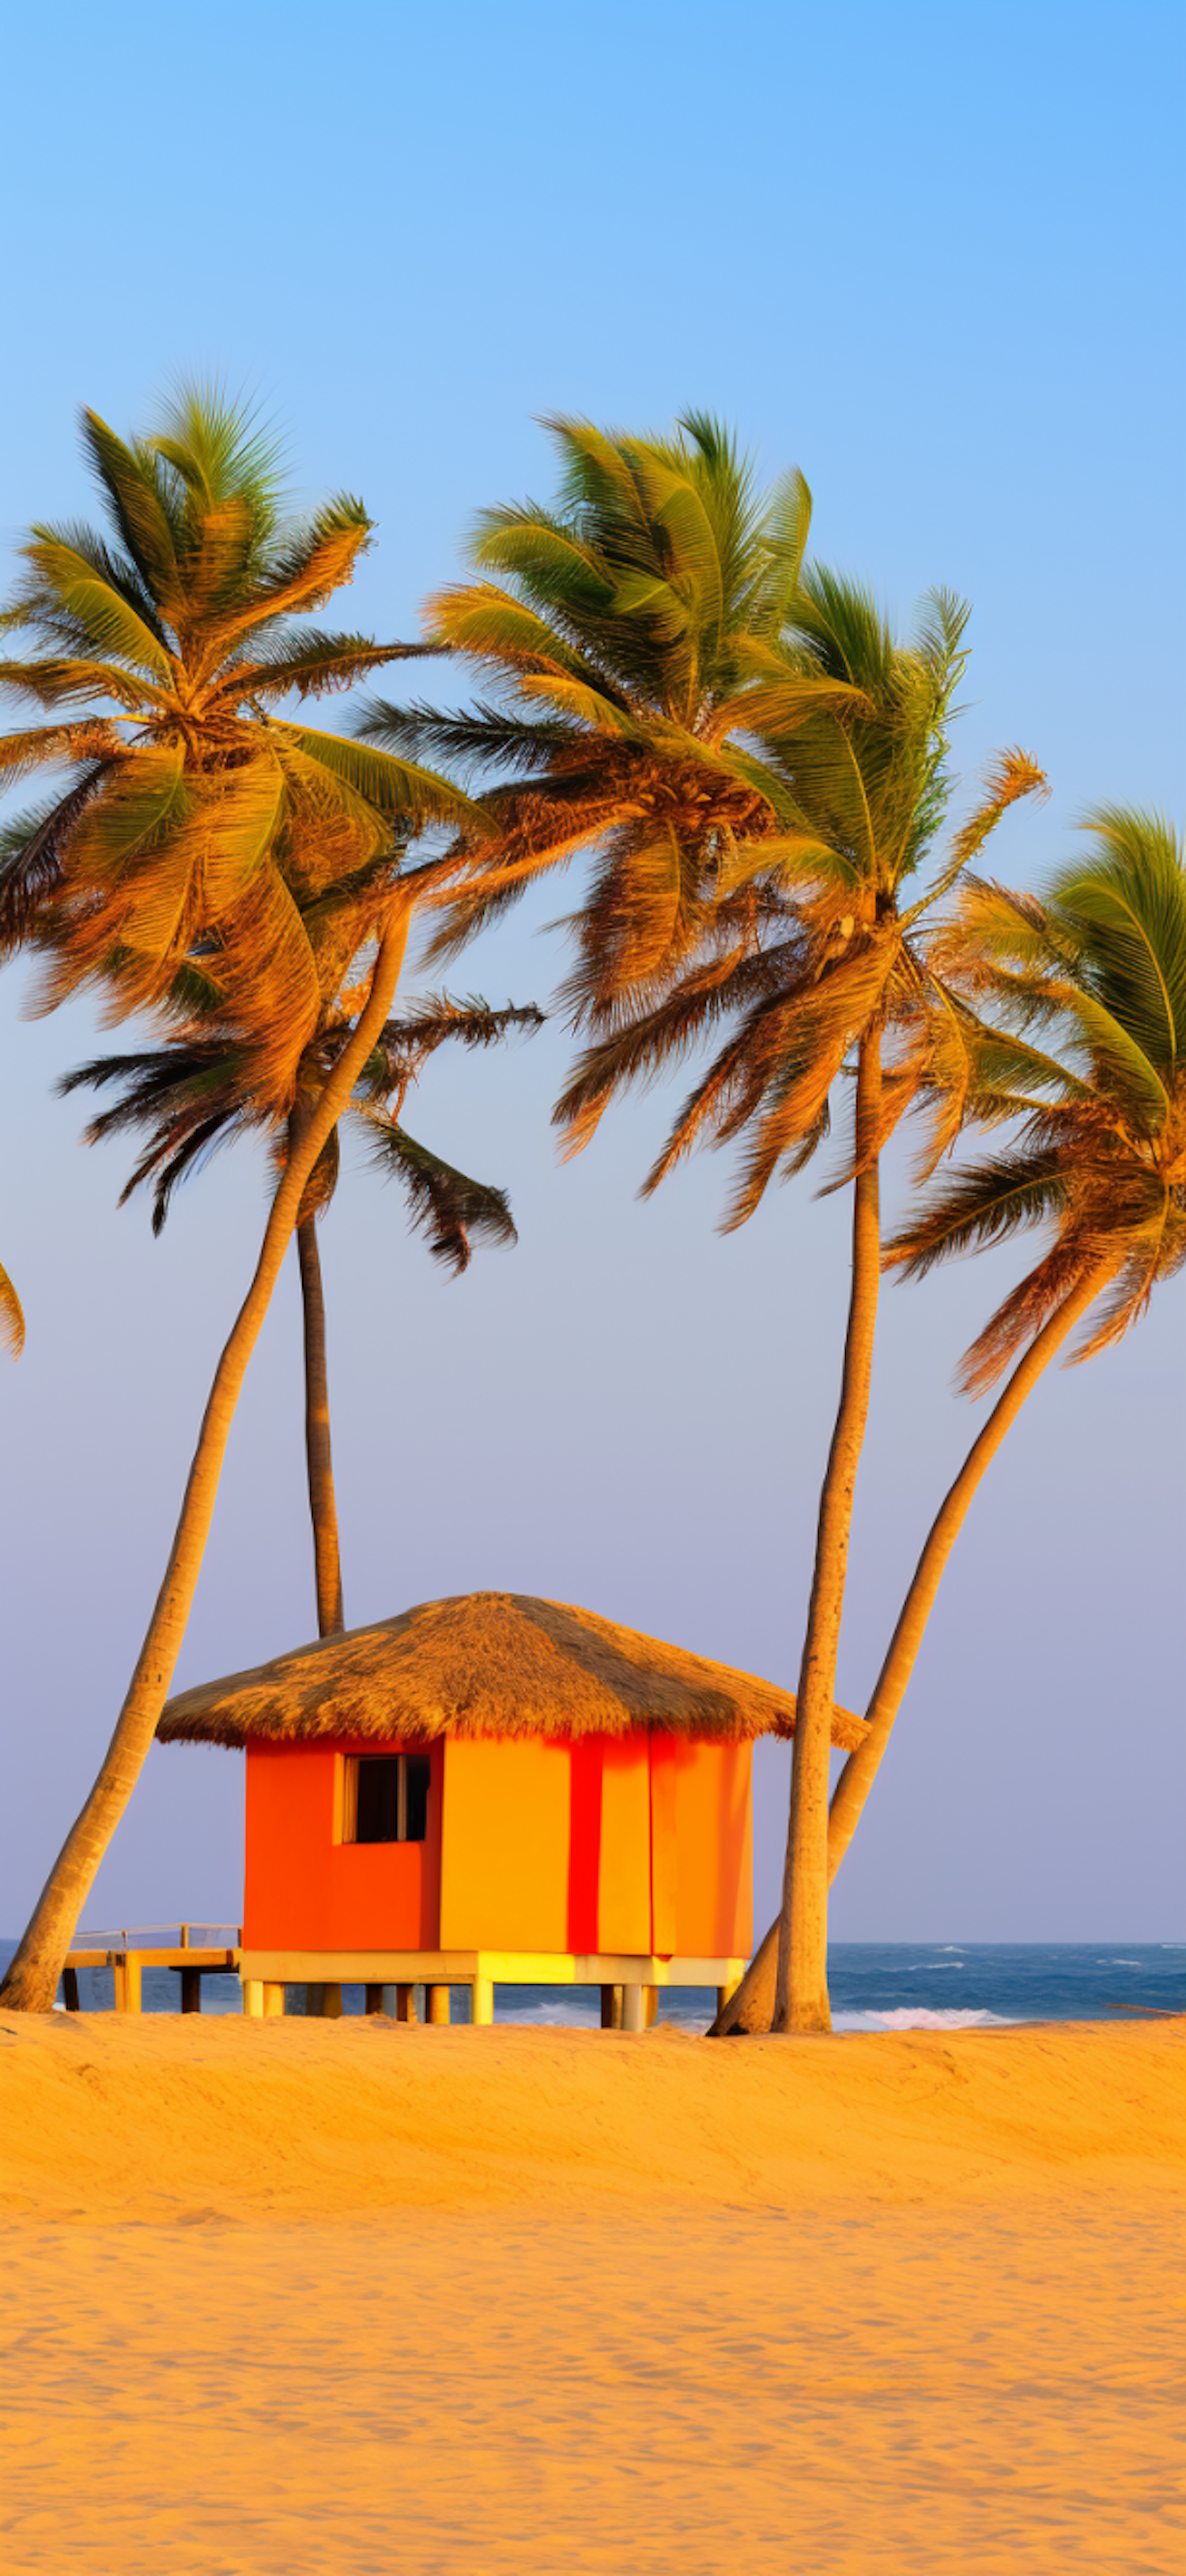 Golden Sunrise at the Secluded Tropical Beach Hut